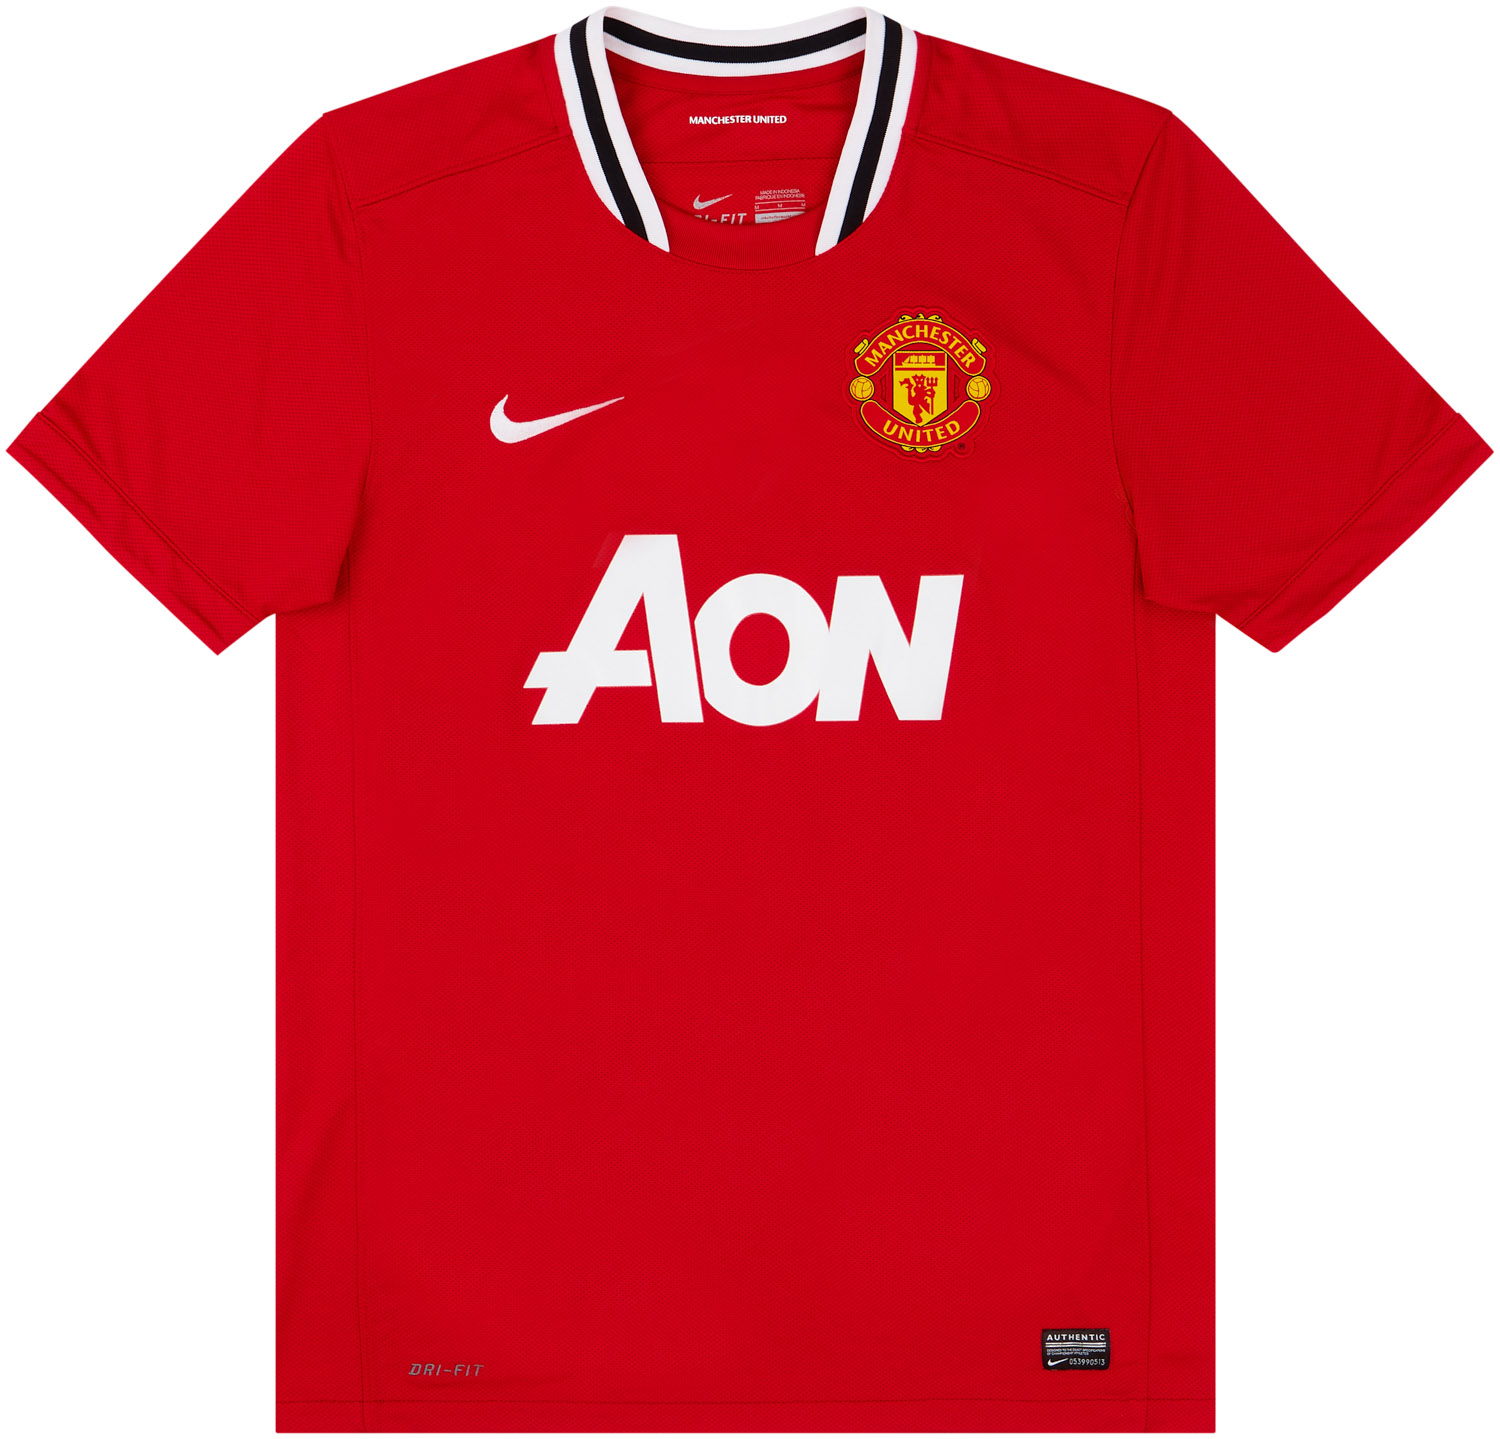 2011-12 Manchester United Home Shirt - 9/10 -